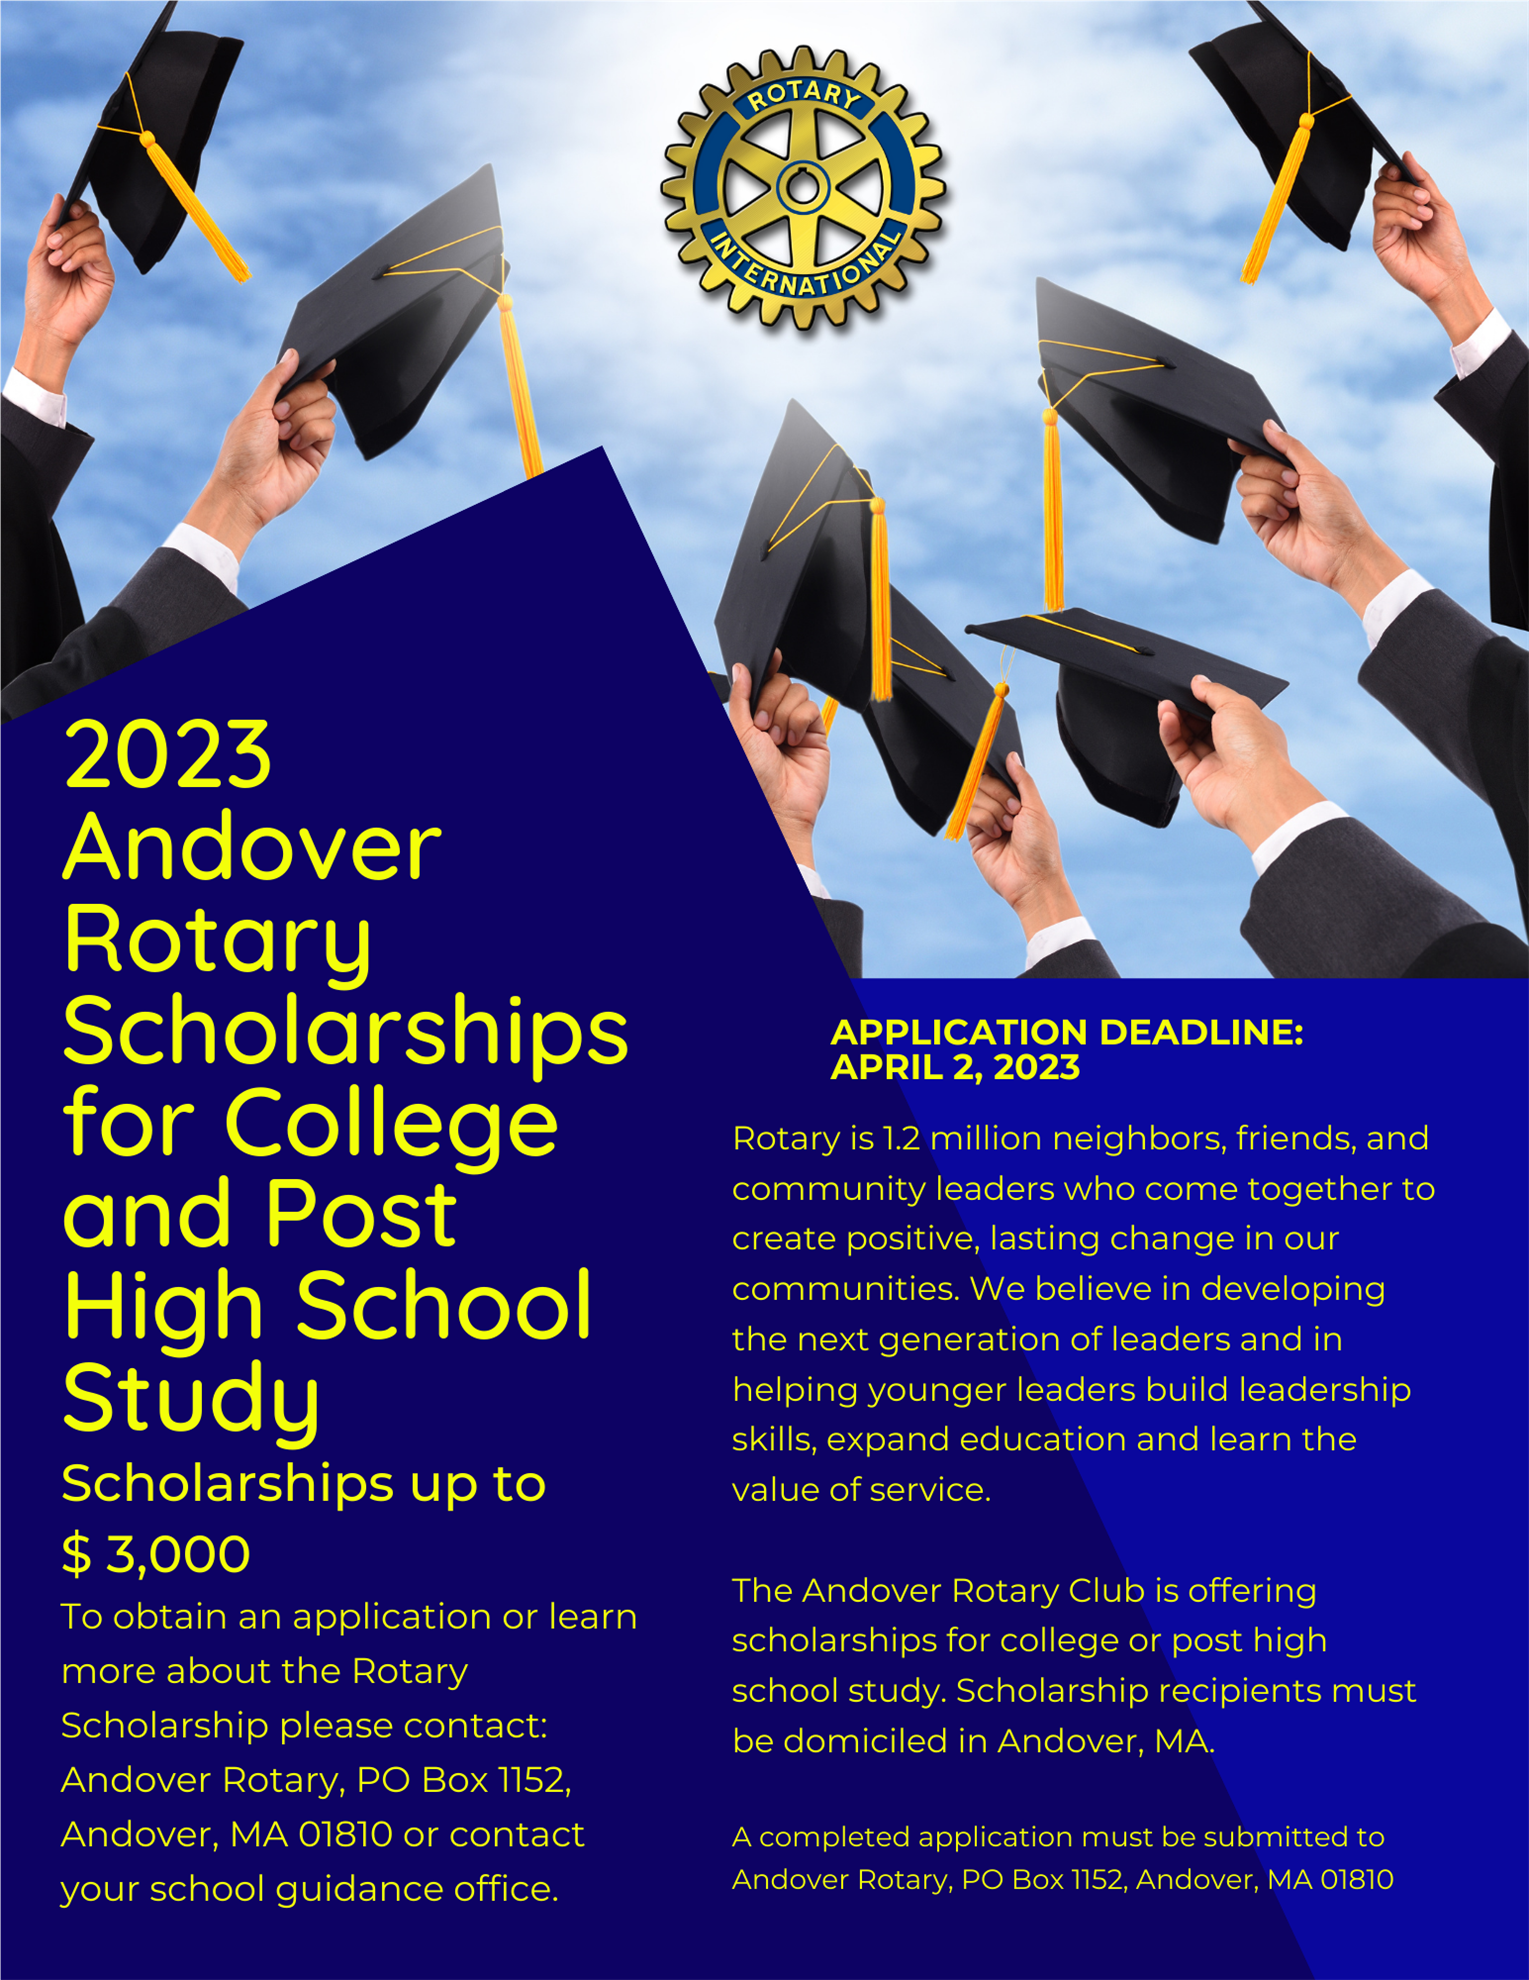 Rotary Club of Andover Scholarships | Rotary Club of Andover